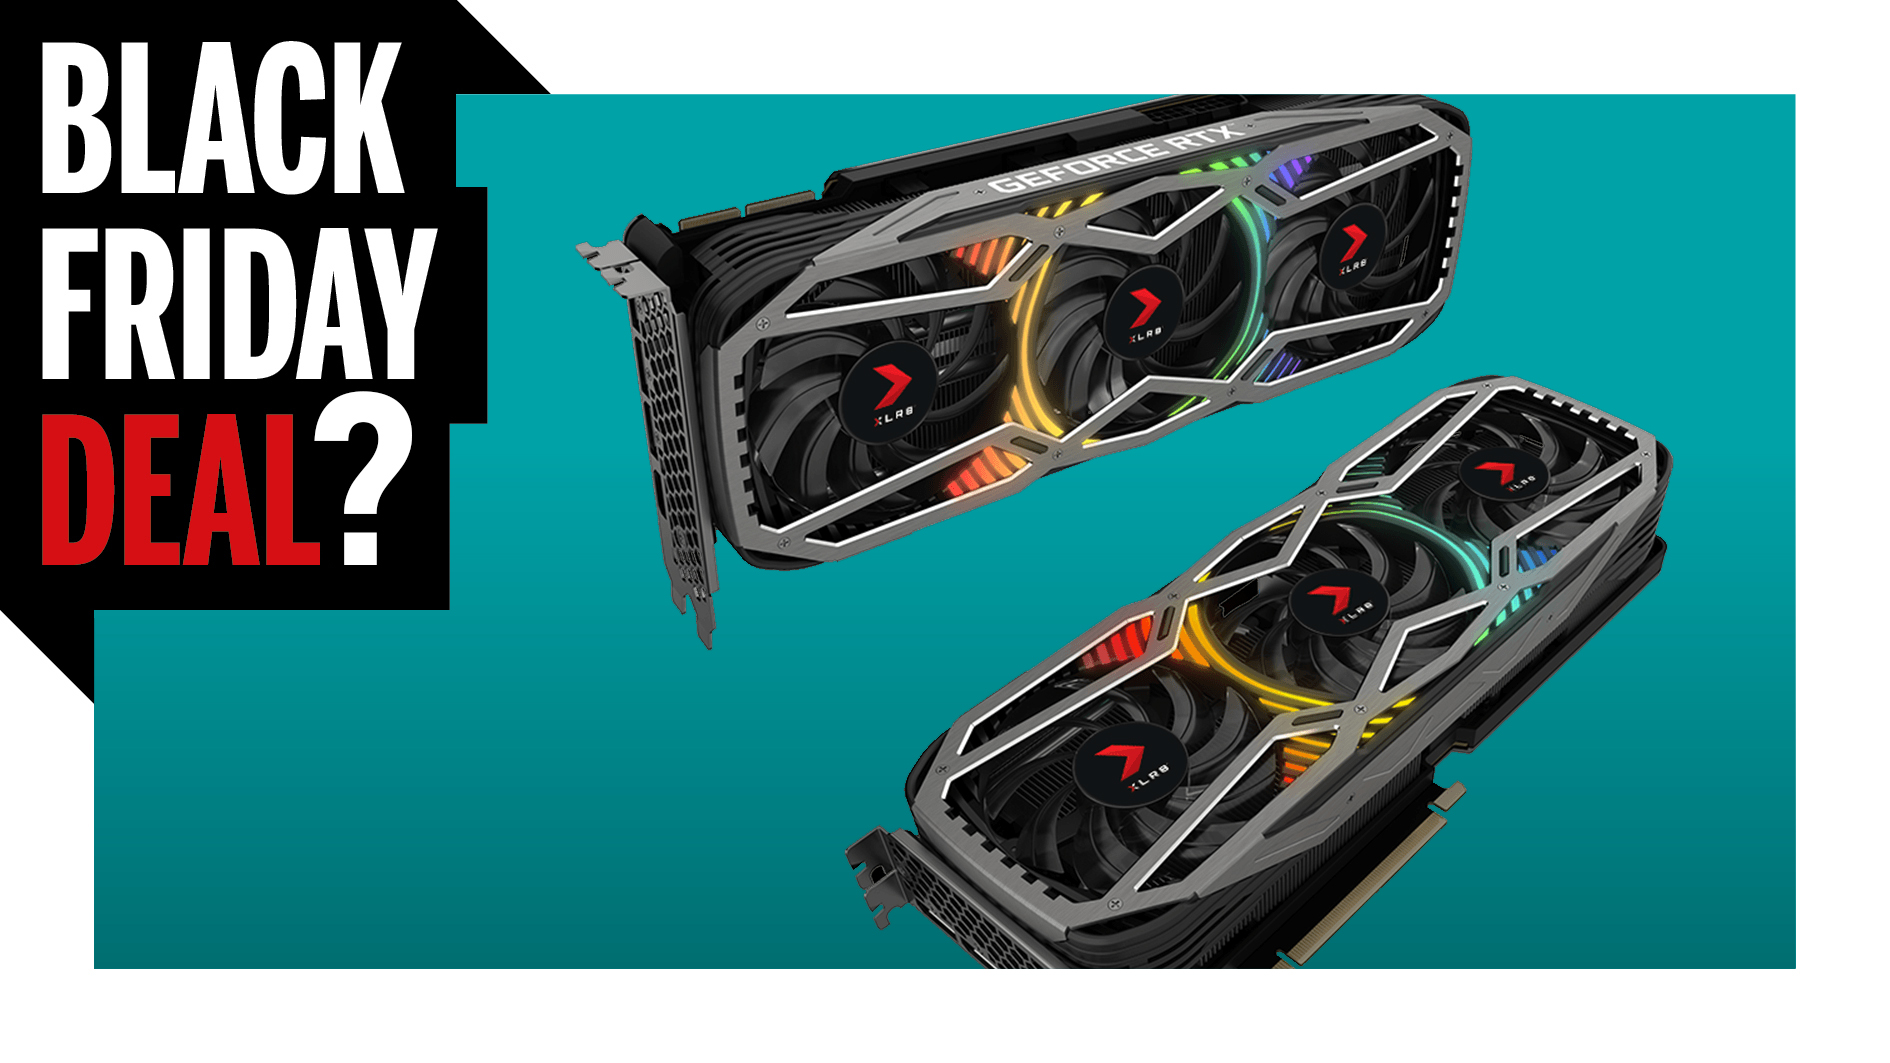  The worst Black Friday deal: an RTX 3090 for $300 more than its list price 